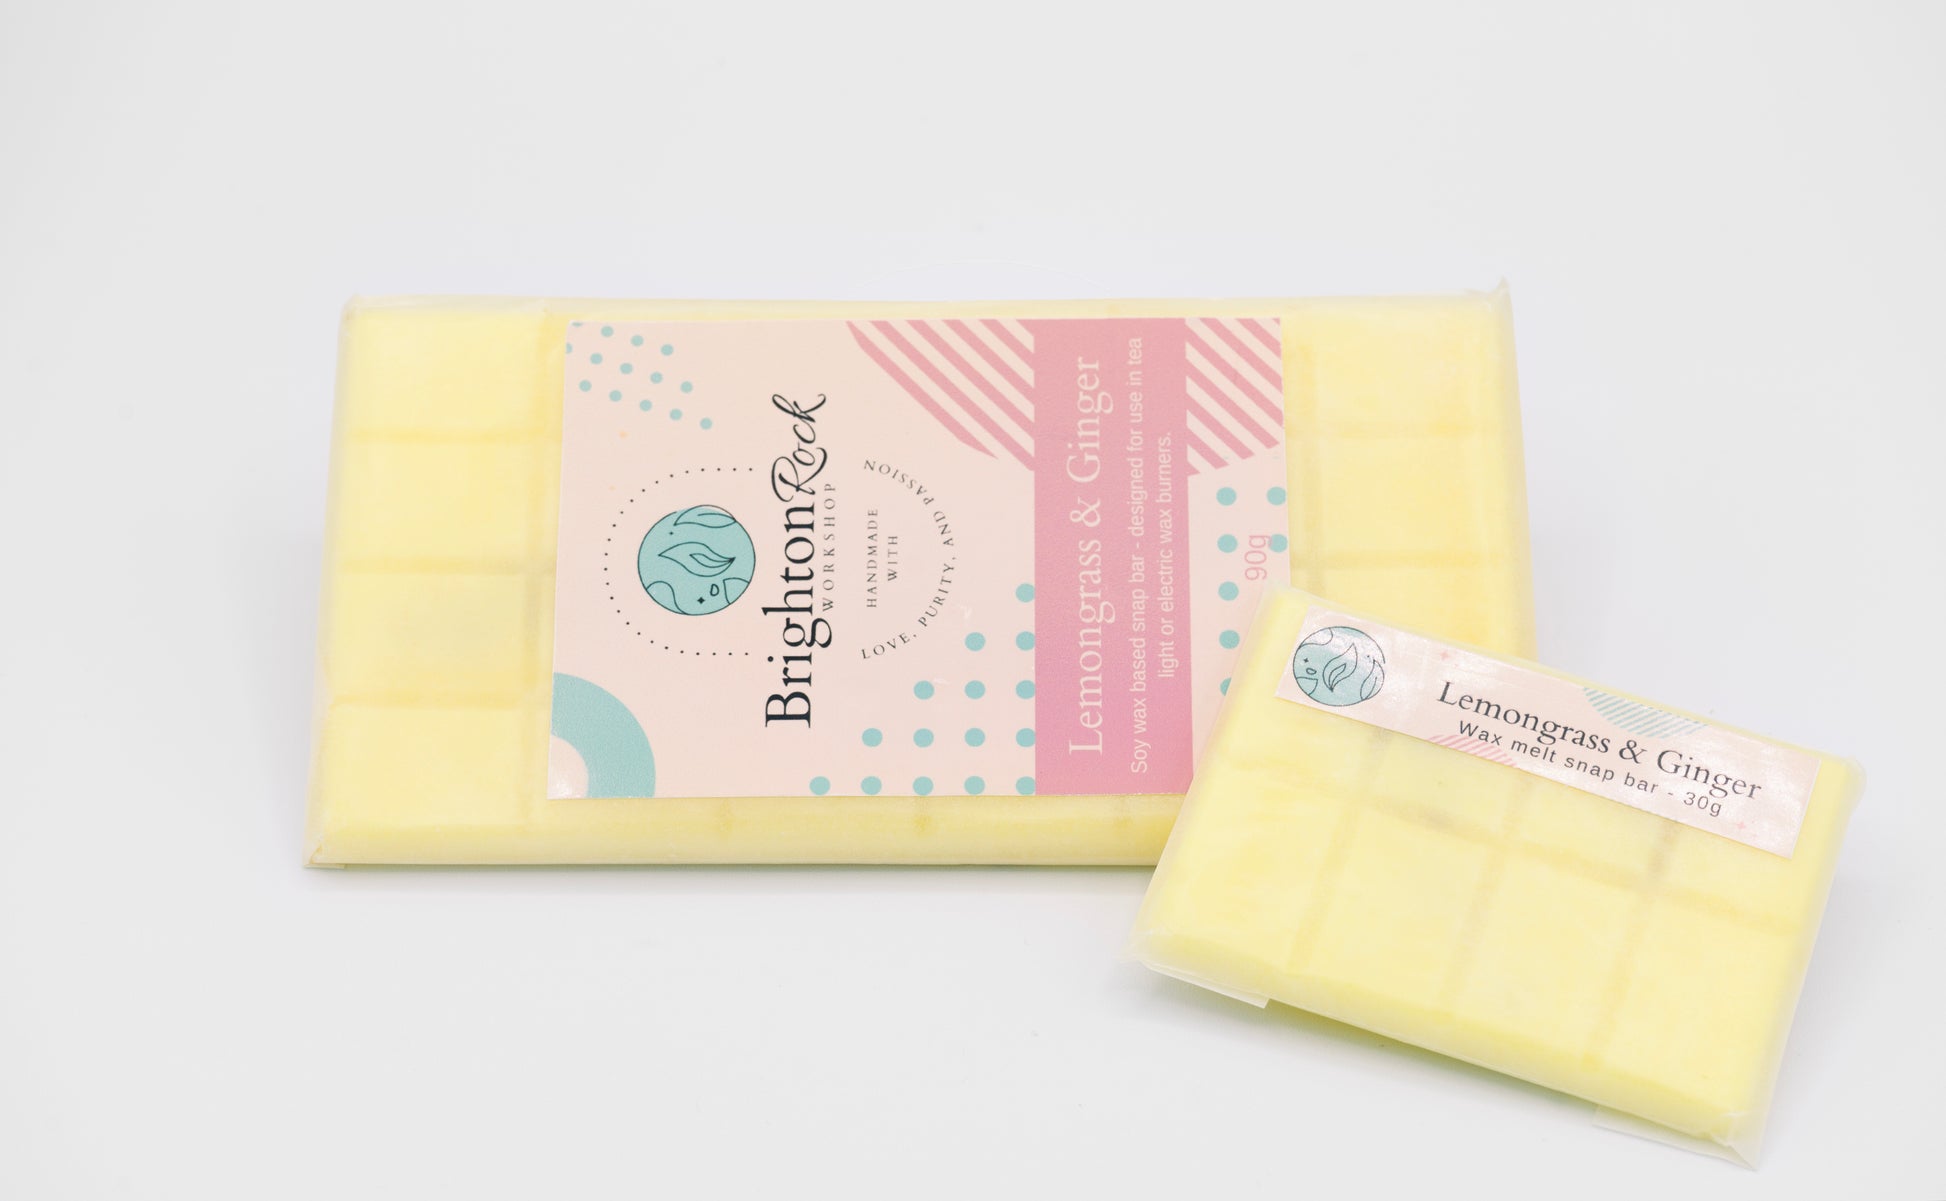 Lemongrass & ginger 30g or 90g strongly scented wax melt snap bars. Eco friendly waxed paper packaging. Brighton Rock Workshop wax melts made in Spain and the United Kingdom, available in two sizes. Suitable for tea light or electric burners